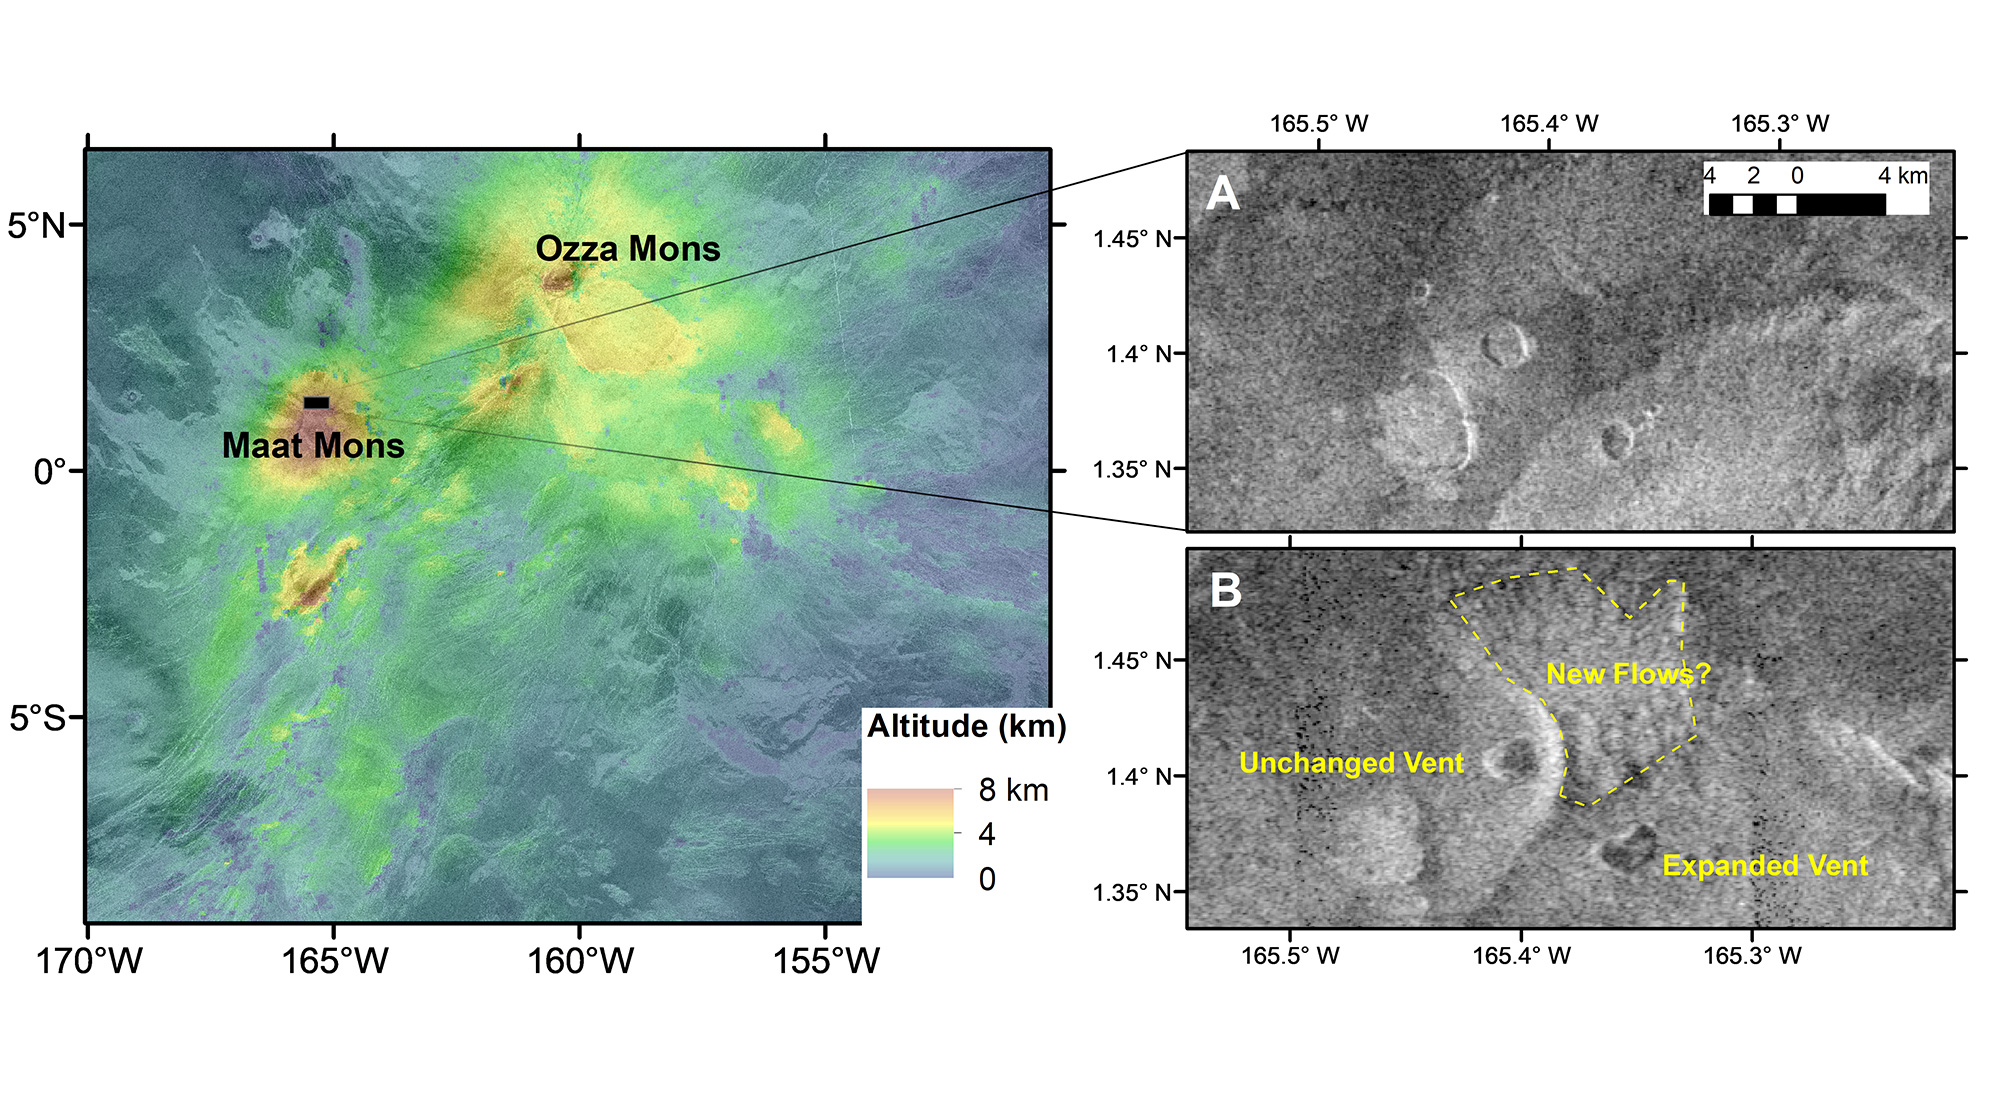 Elevation data for the Maat and Ozza Mons region on Venus' surface is shown at left, with the study area indicated by the black box.  At right are the Magellanic observations before (A) and after (B) the expanded vent at Maat Mons with possible new lava flows after an eruptive event.